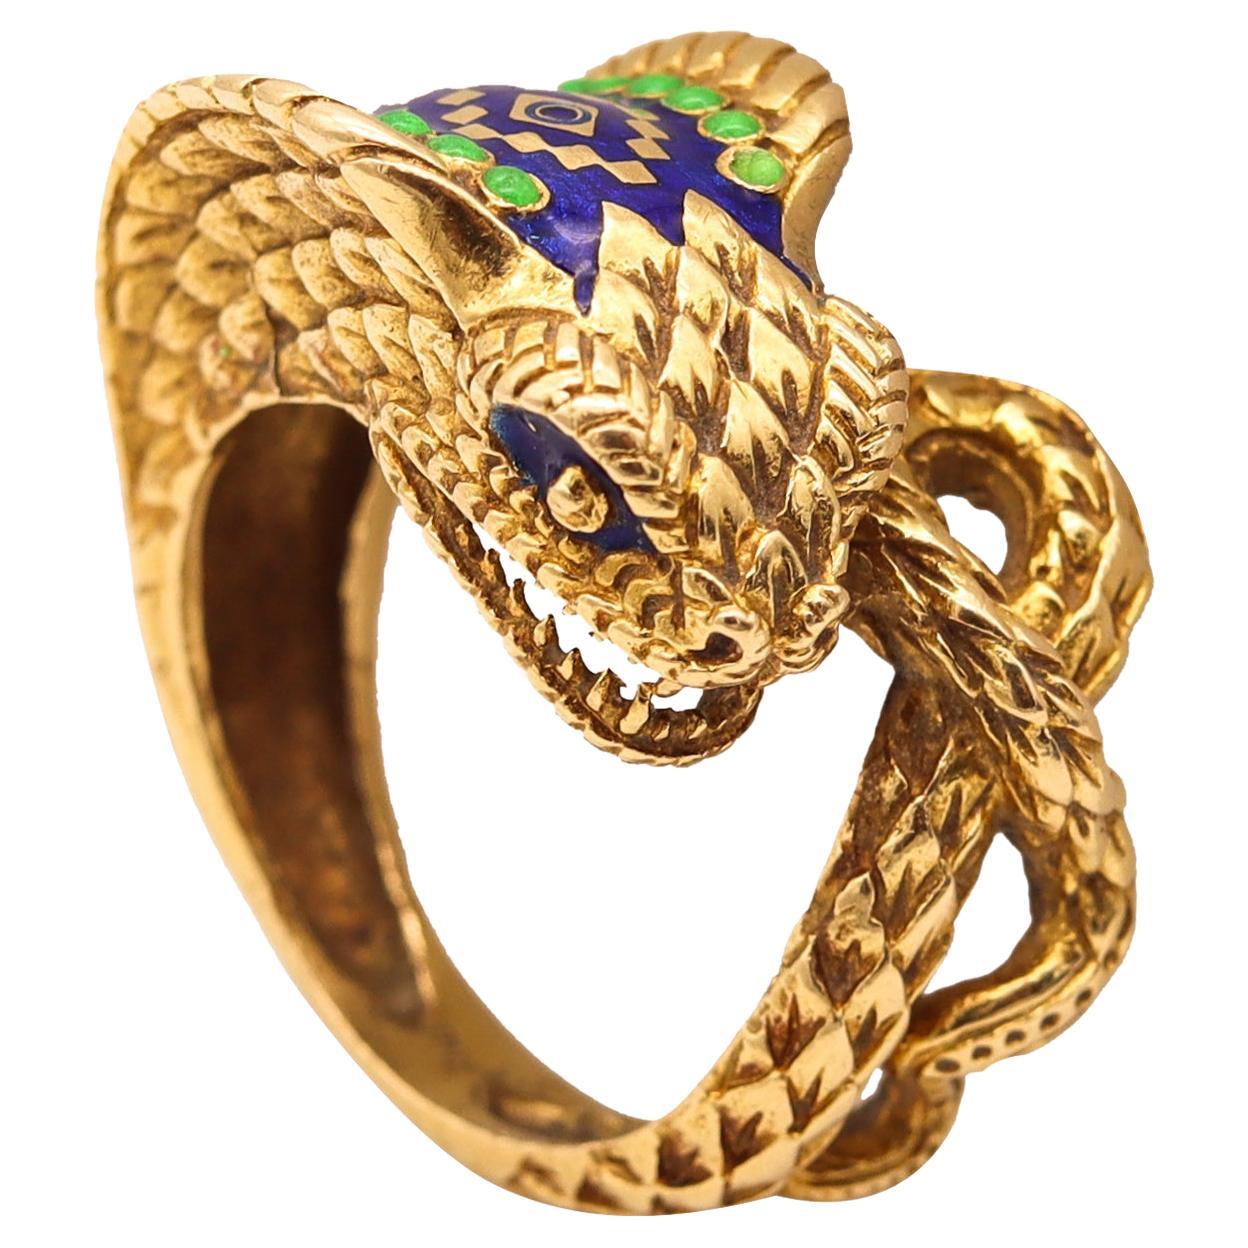 Etruscan Revival Sculpted Cobra Ring in 18kt Yellow Gold with Color Enamel For Sale